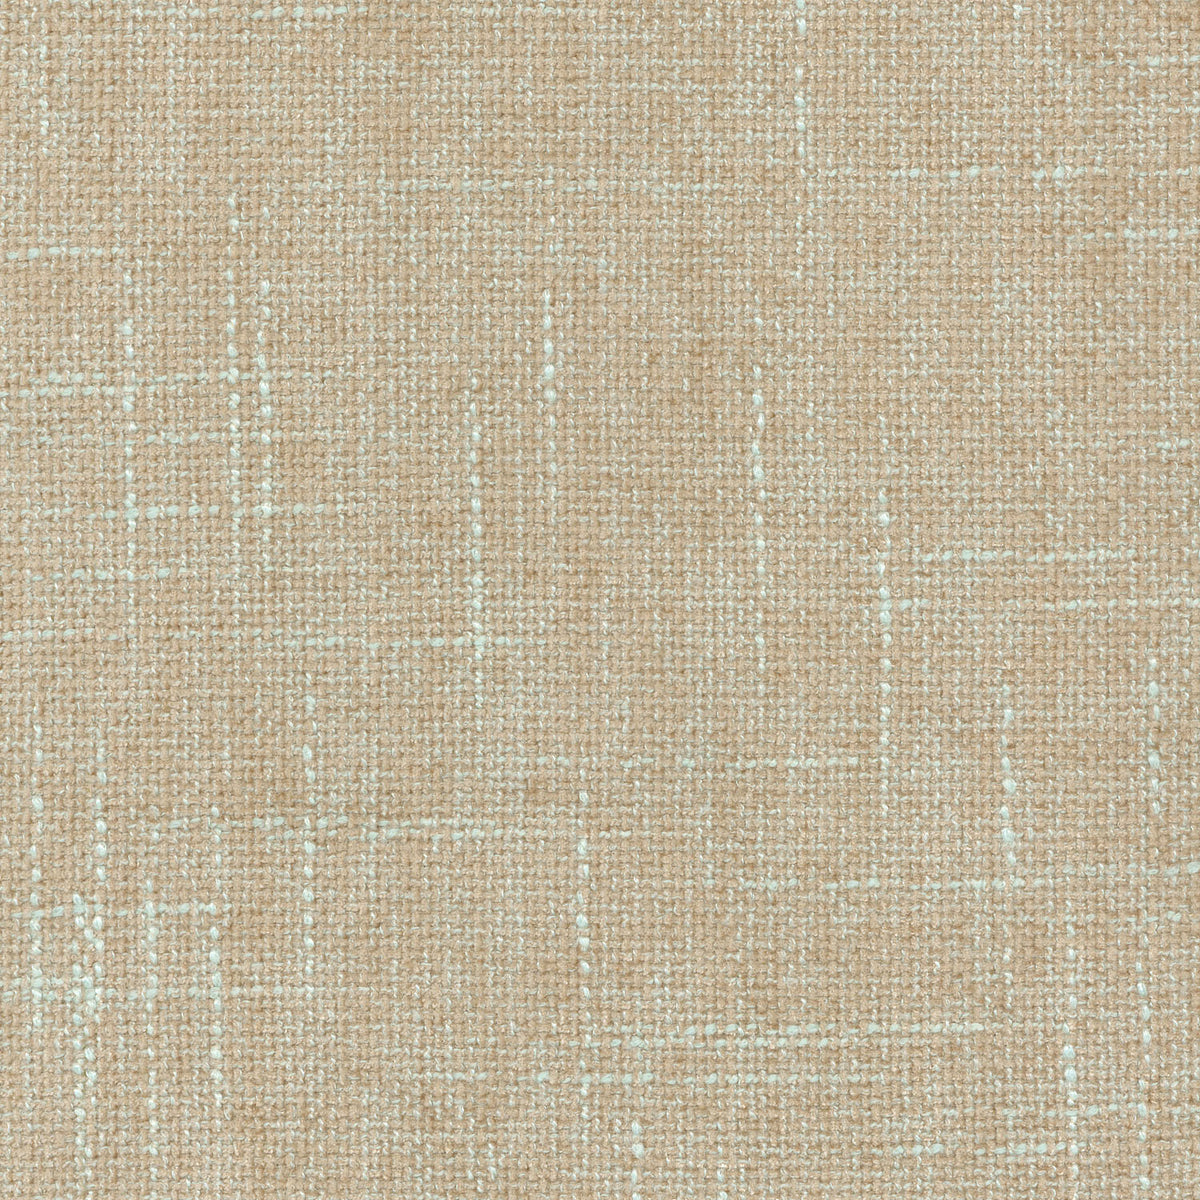 P/K Lifestyles Mixology - Mineral 404387 Upholstery Fabric